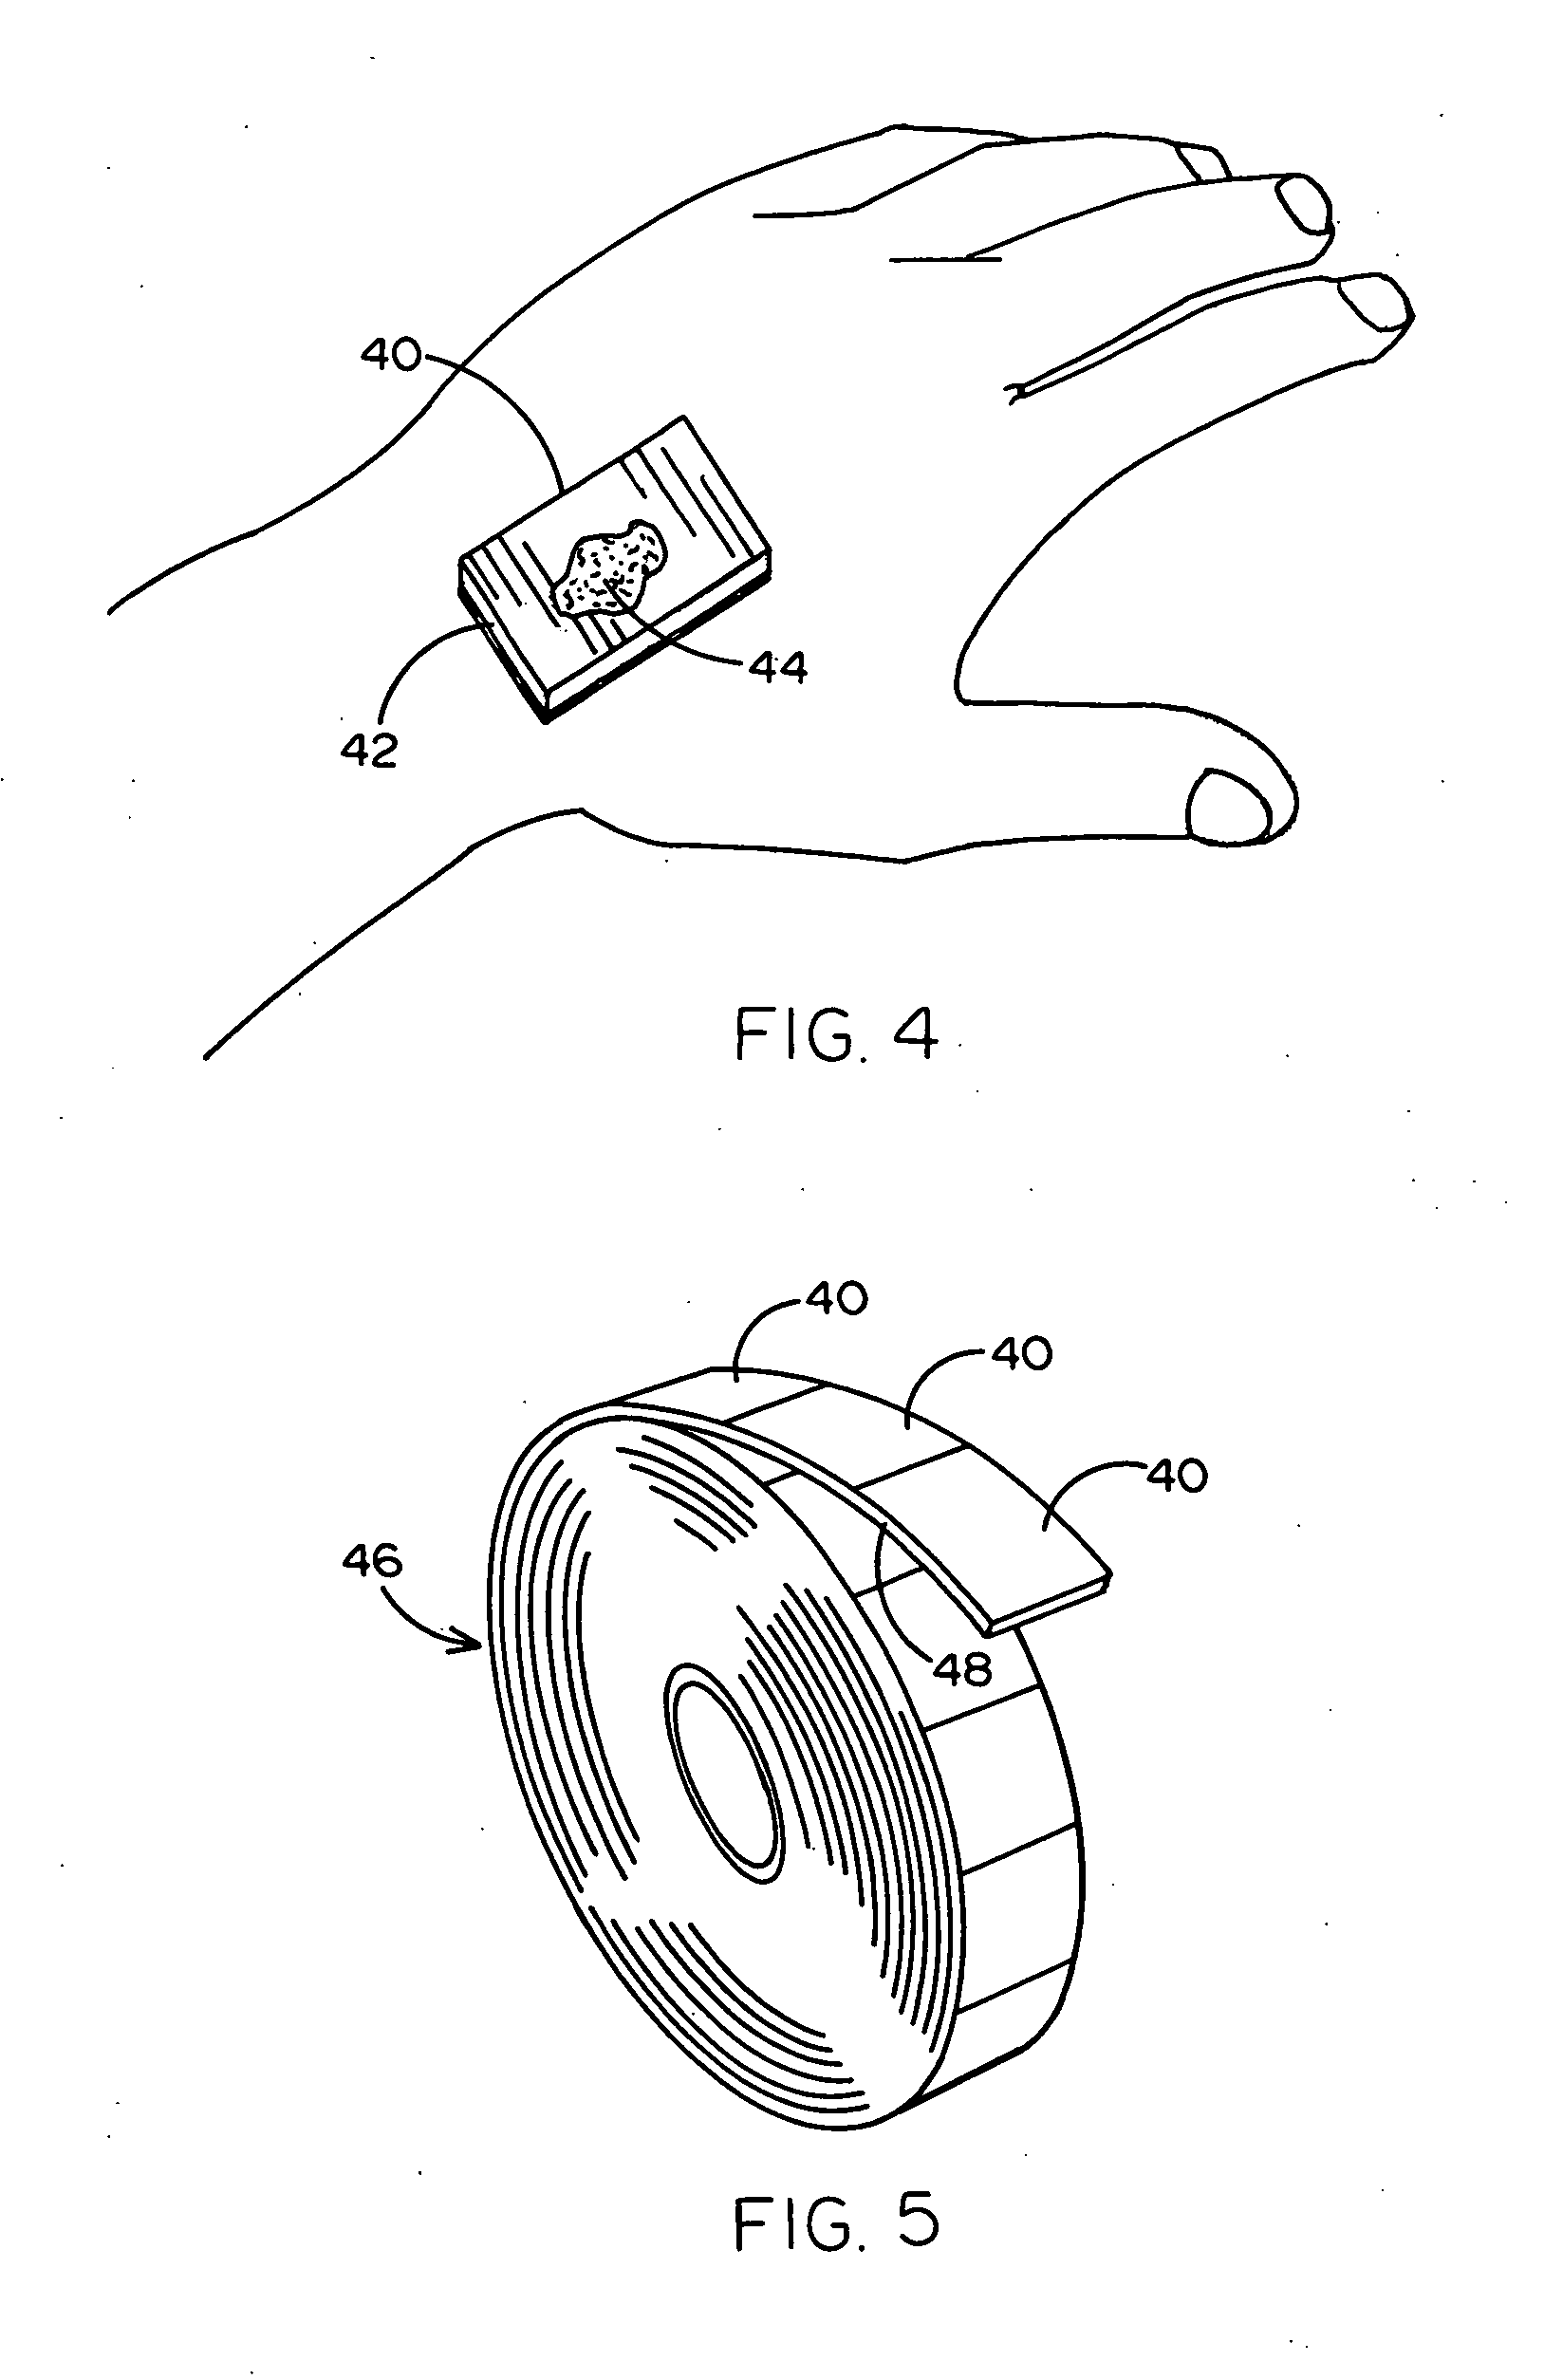 Band, bracelet or strip carrier for an anti-microbial agent to reduce the spread of disease